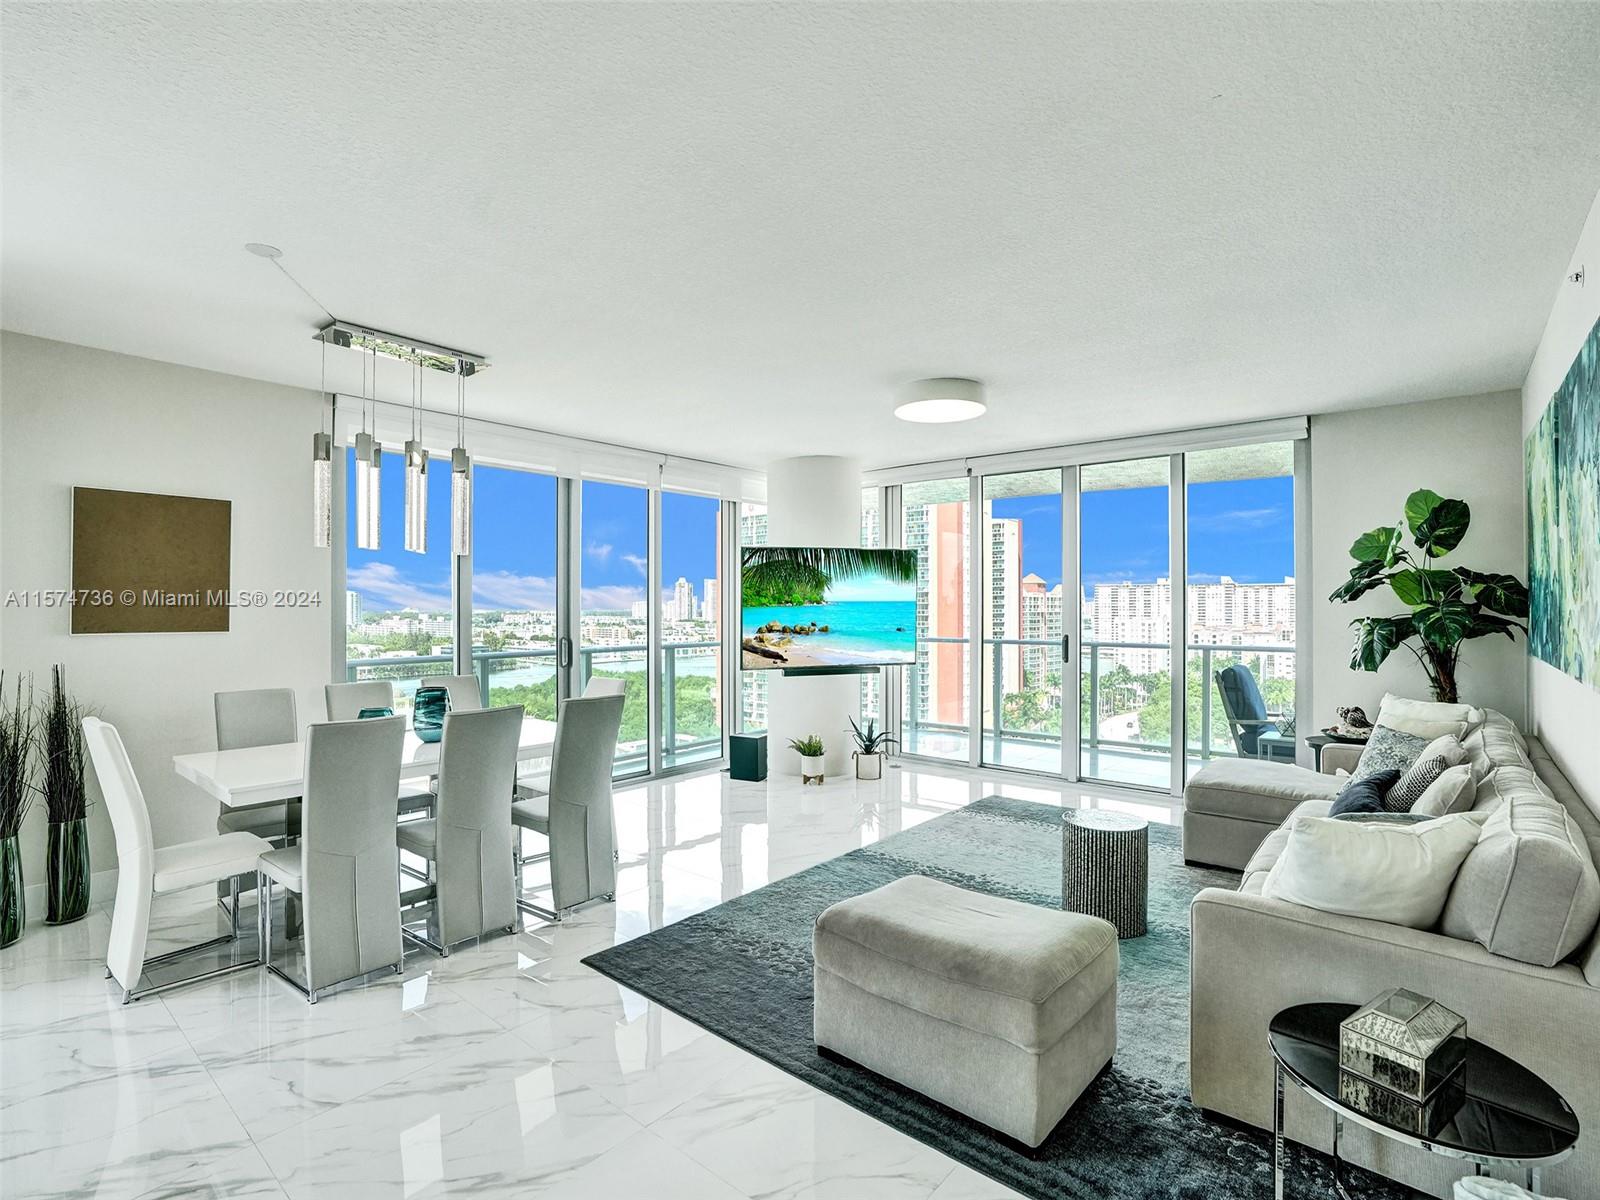 Located in Sunny Isles Beach one of the most beautiful areas in Miami, walking distance from the beach, restaurants, and bars. Turnkey furnished corner unit in a brand new boutique building with 5* amenities. Expansive 3 beds, 3.5 baths, 1,892 sq. ft., 10ft ceilings, floor-to-ceiling impact glass windows and doors, with wrap-around balcony with beautiful panoramic view. Open floor plan with high-end European appliances, window treatments, and light fixtures. Generous primary suite with walk-in closet and a bath with a separate soaking tub and shower. The unit comes with storage space, 2 assigned parking spaces + complimentary valet. Amenities: beach service, 4 pools, jacuzzi, gym, Spa, kids club, theater, games room, bistro at the pool deck, party room, hotel suite for guest and much more.